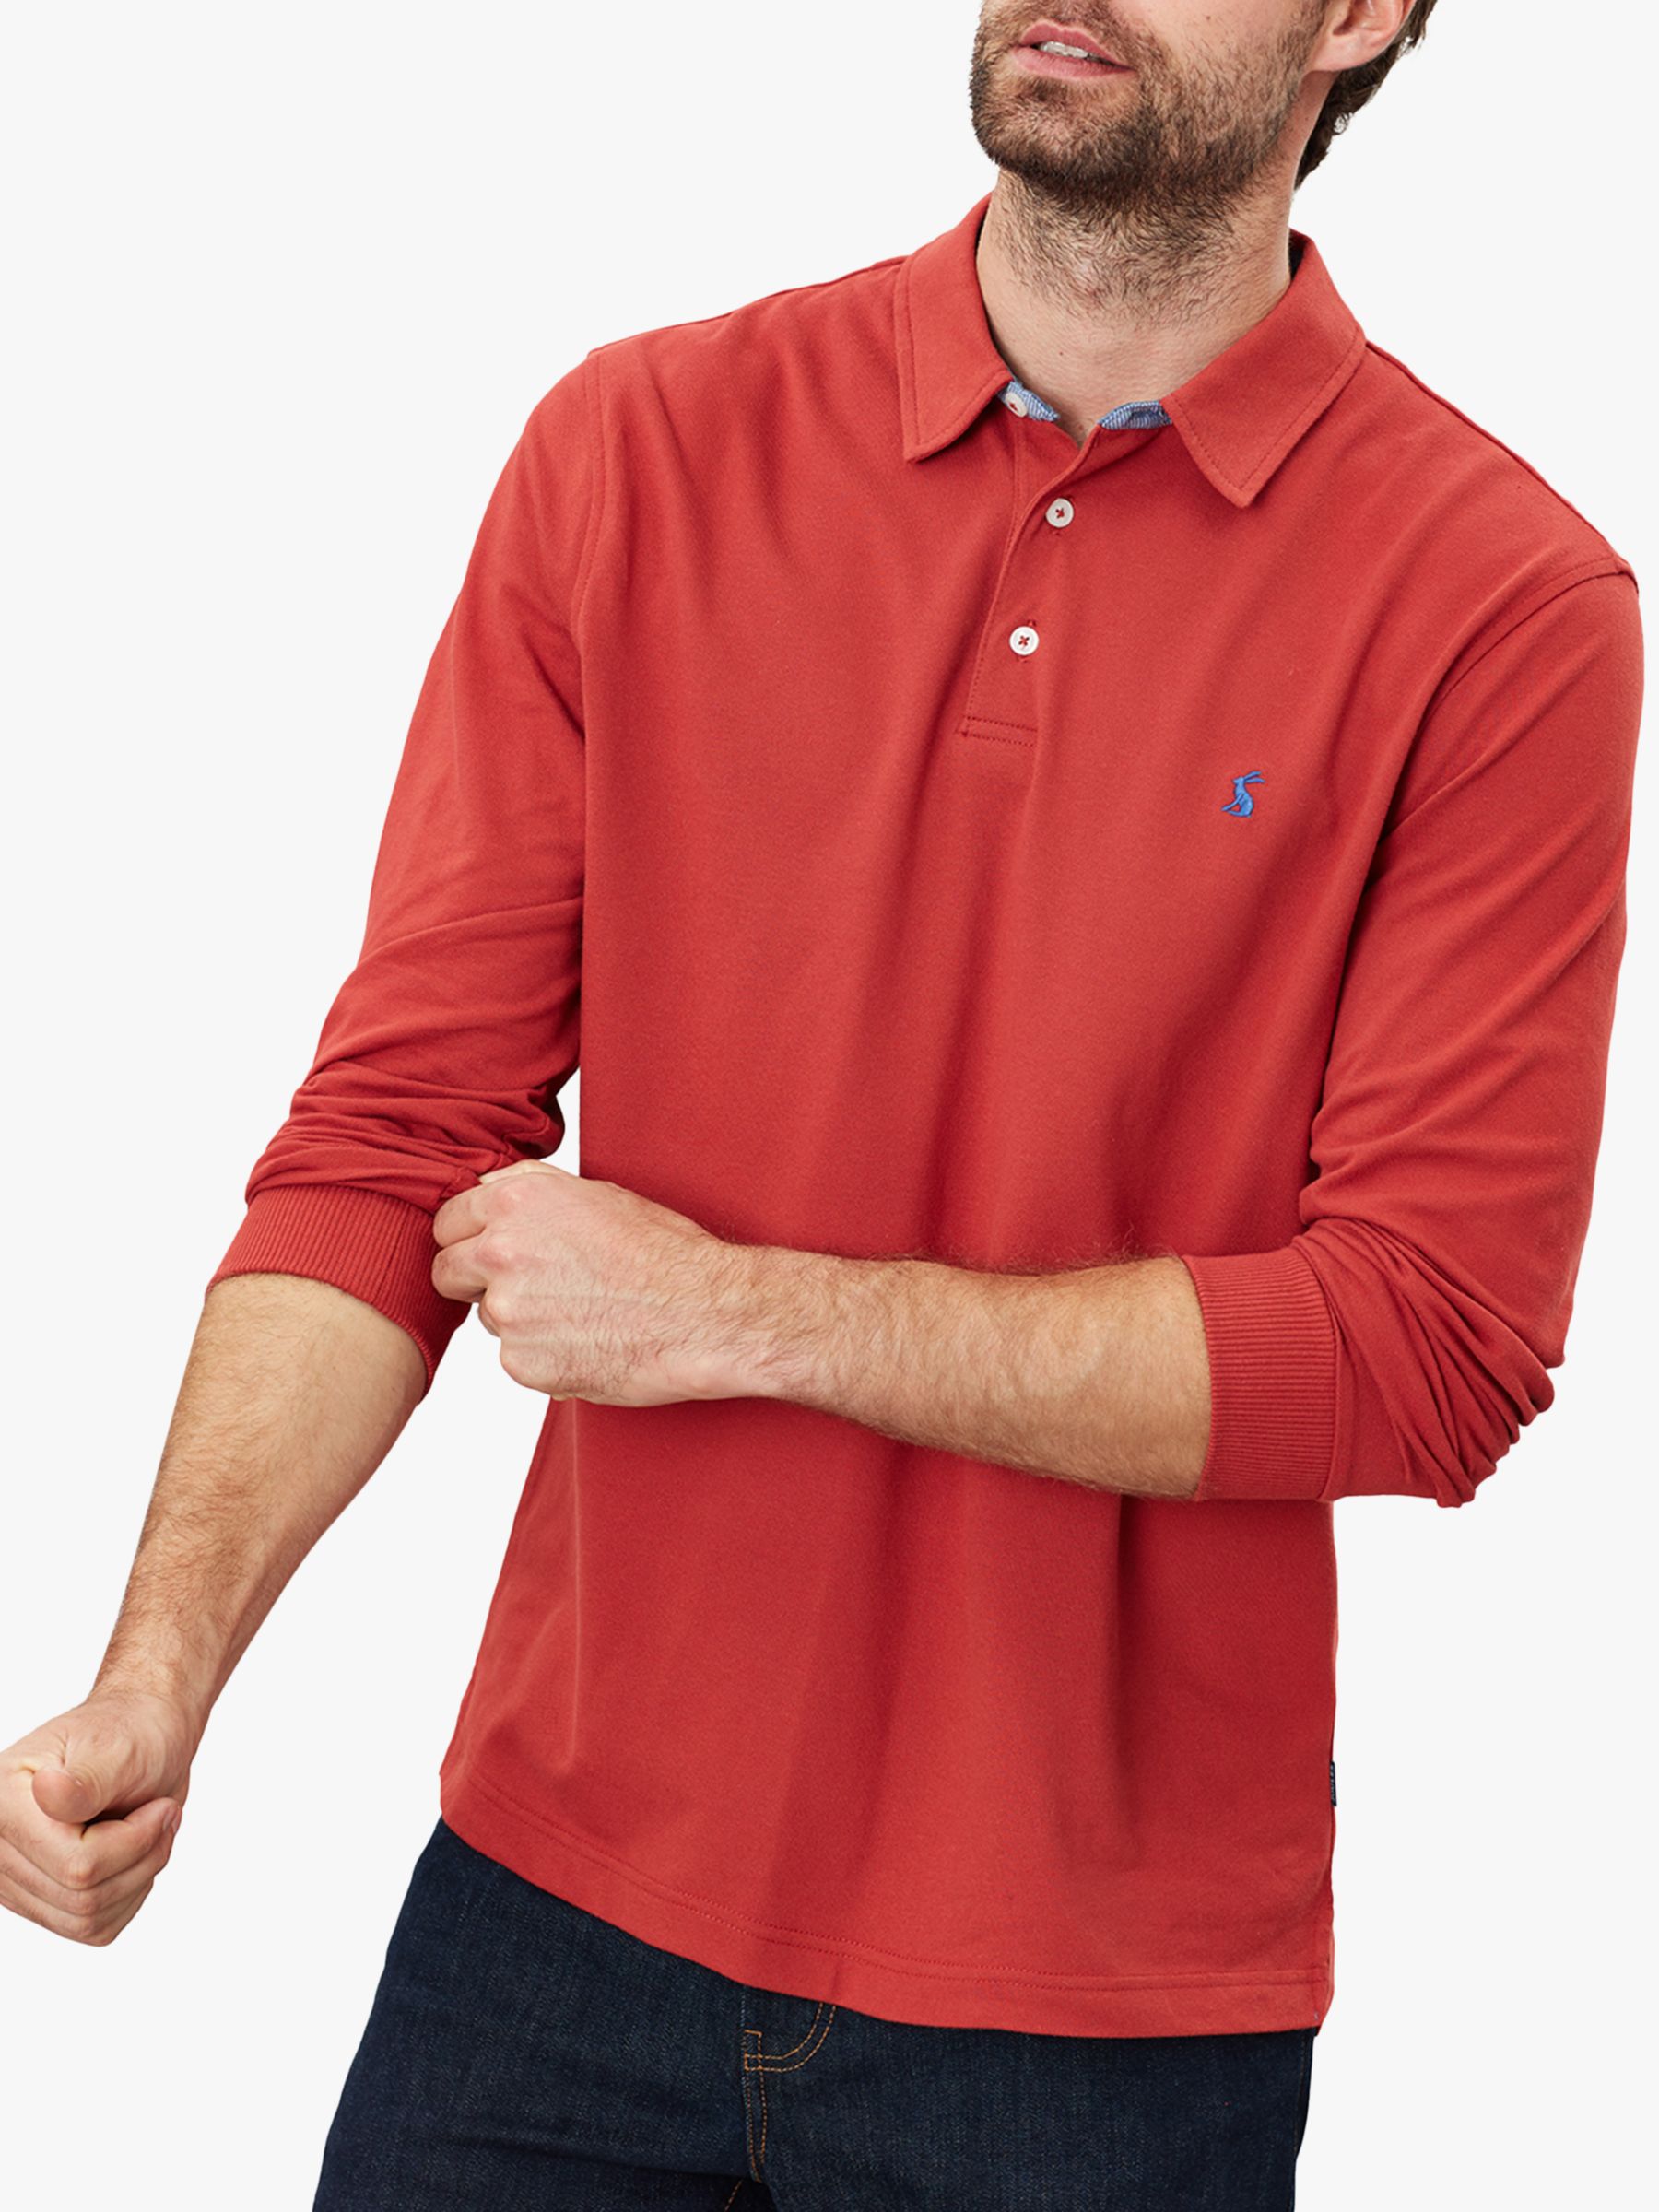 Joules Woodwell Polo Shirt, Soft Red